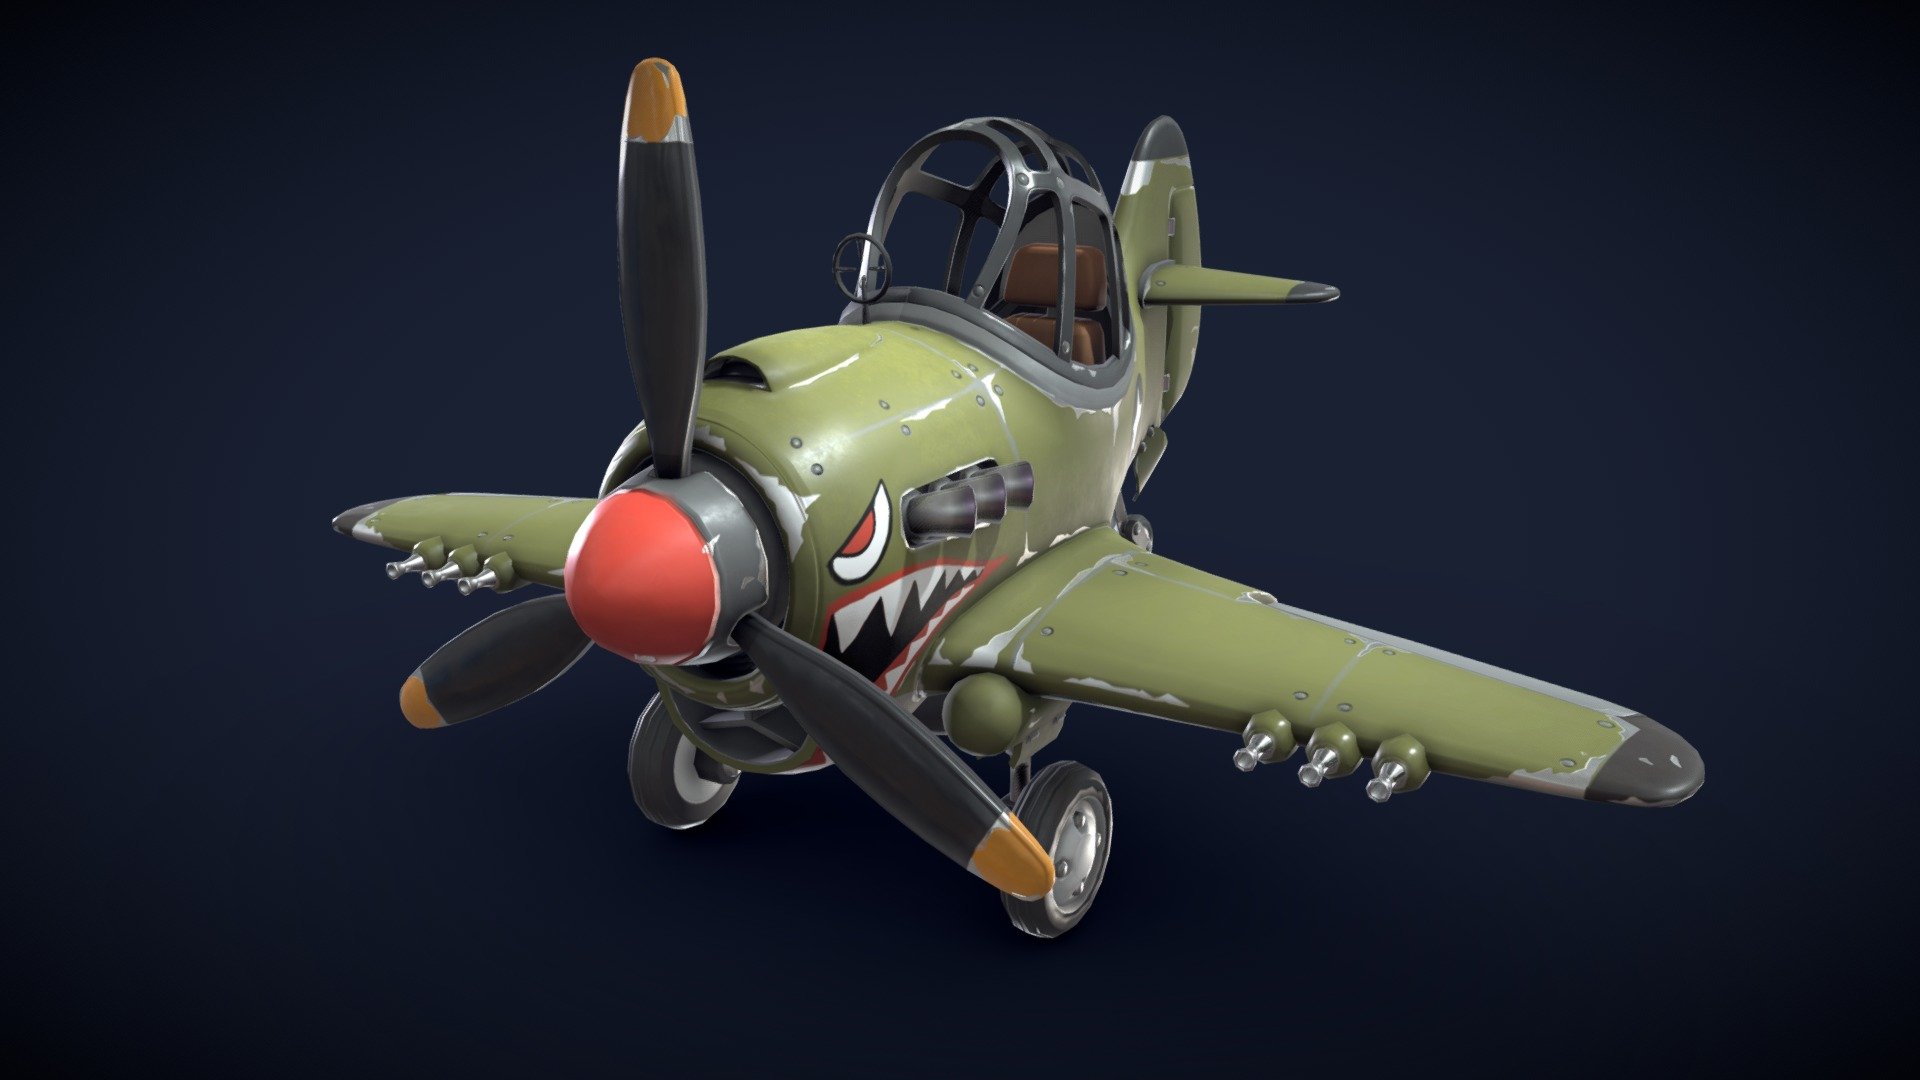 A Plane inspired by WWII aircrafts. This model is low poly and optimized for real-time usage 3d model